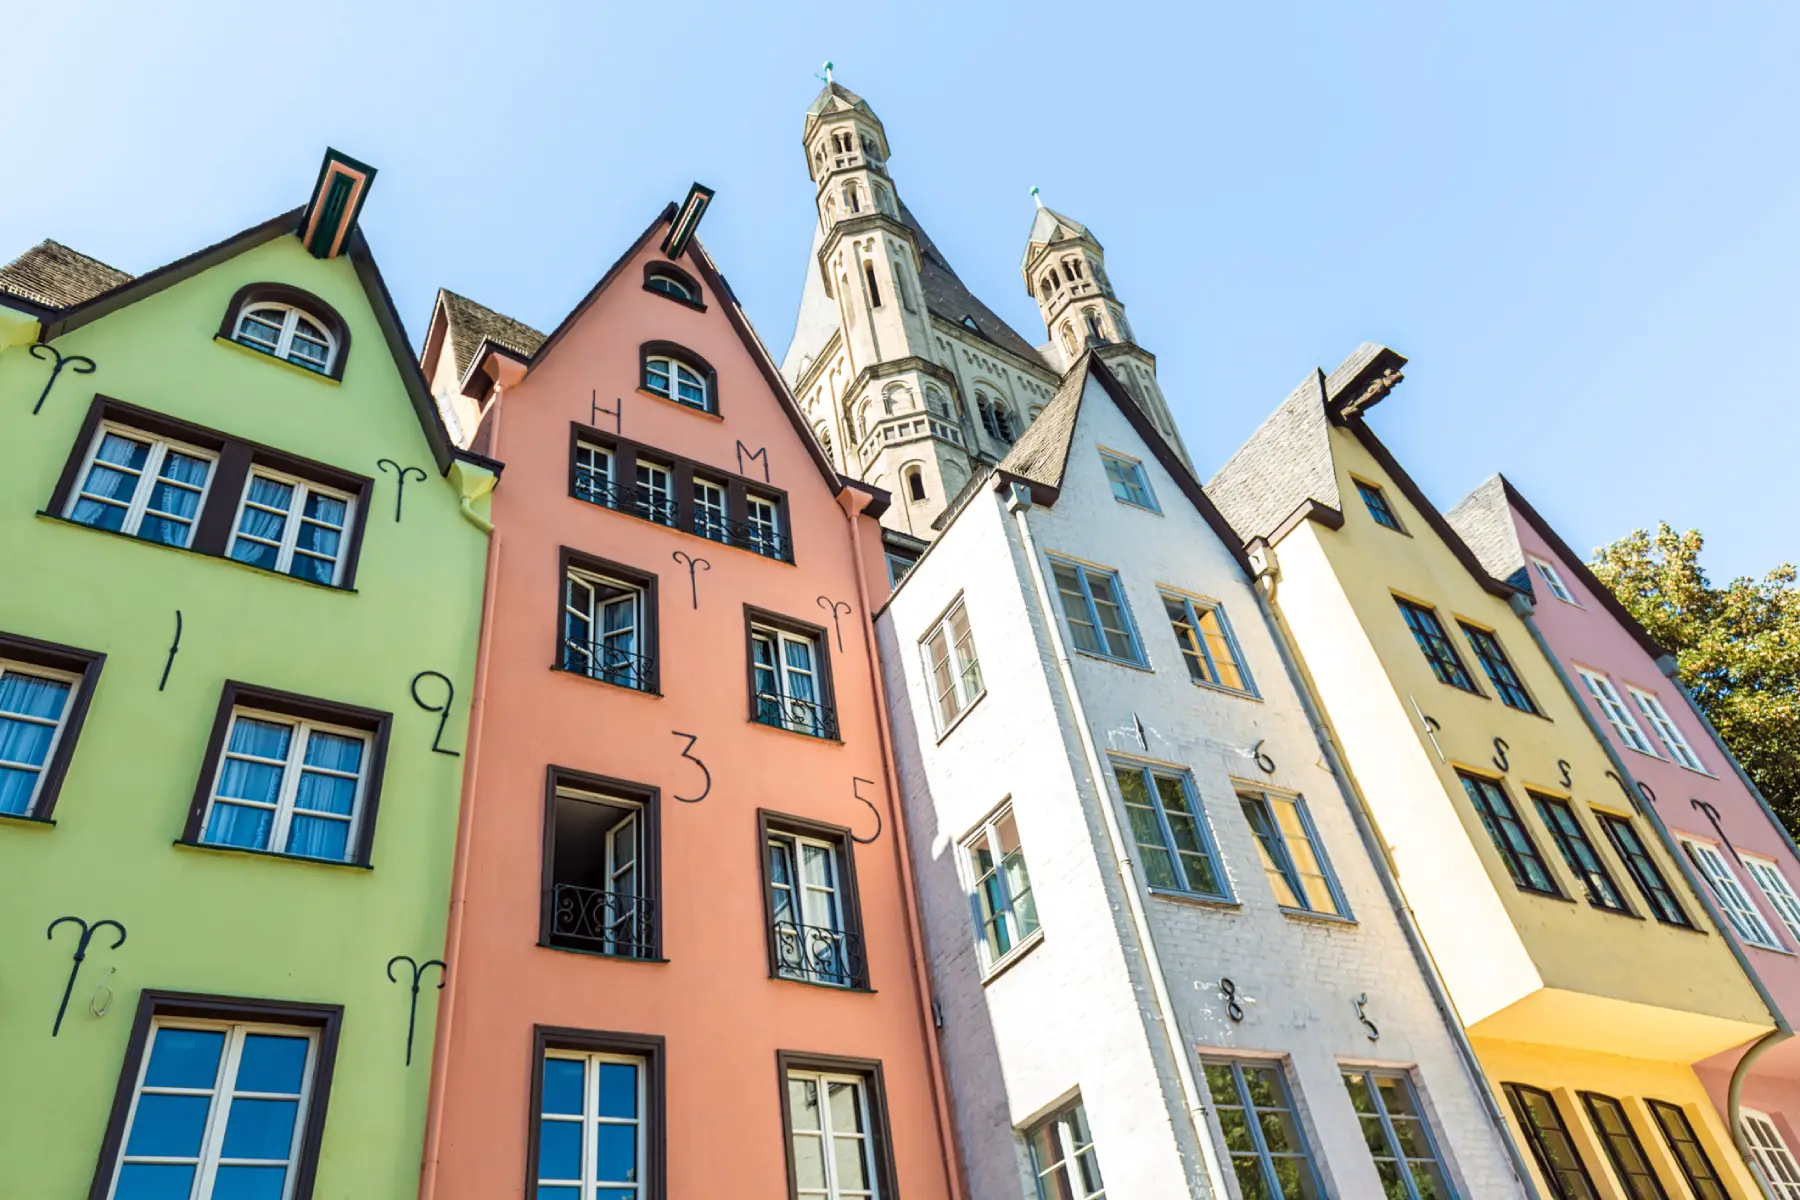 The colorful fronts of some houses in Old Town Cologne, Germany.